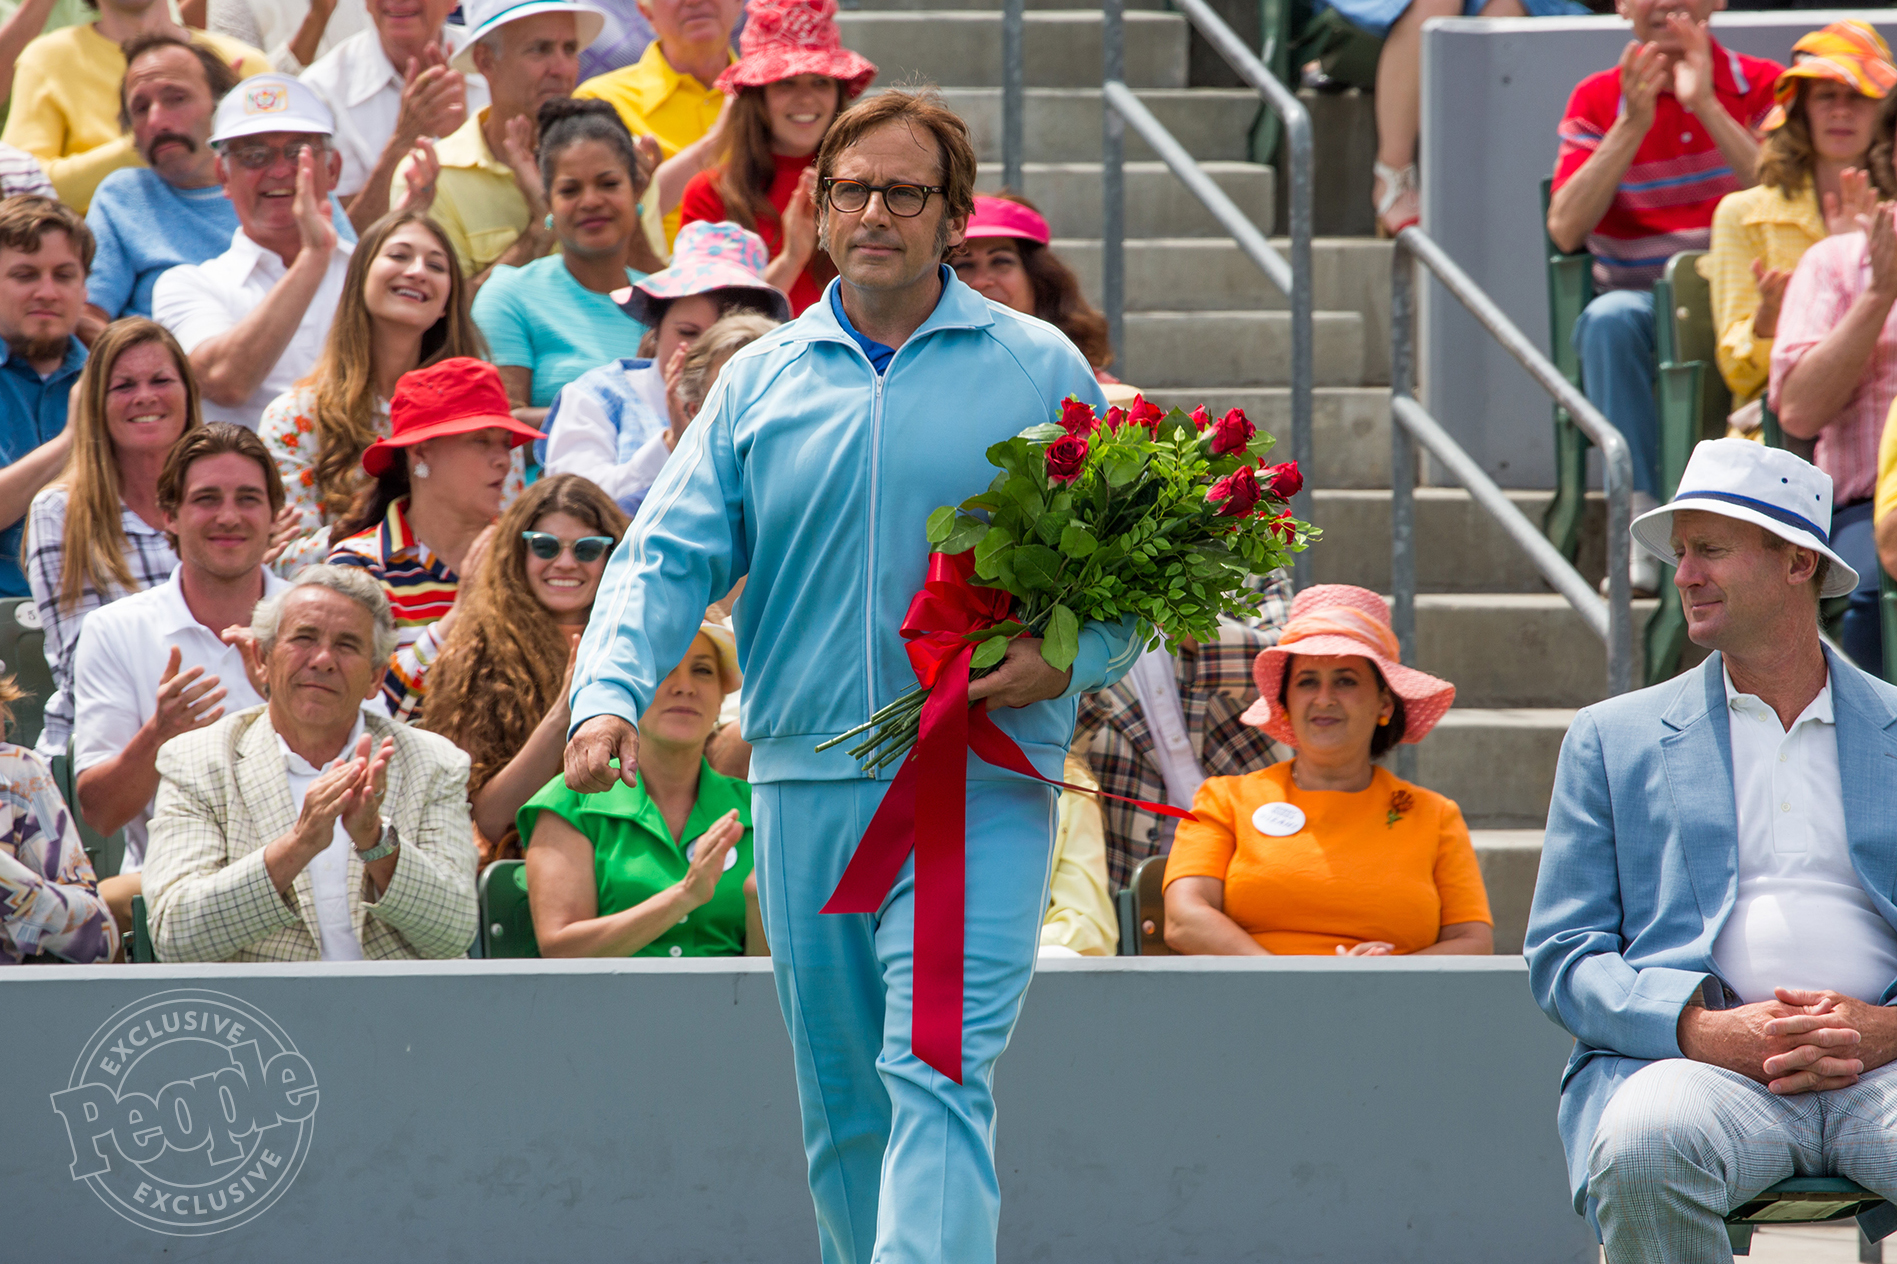 Movie review: “Battle of the Sexes” a relevant spin on a 1970s tennis